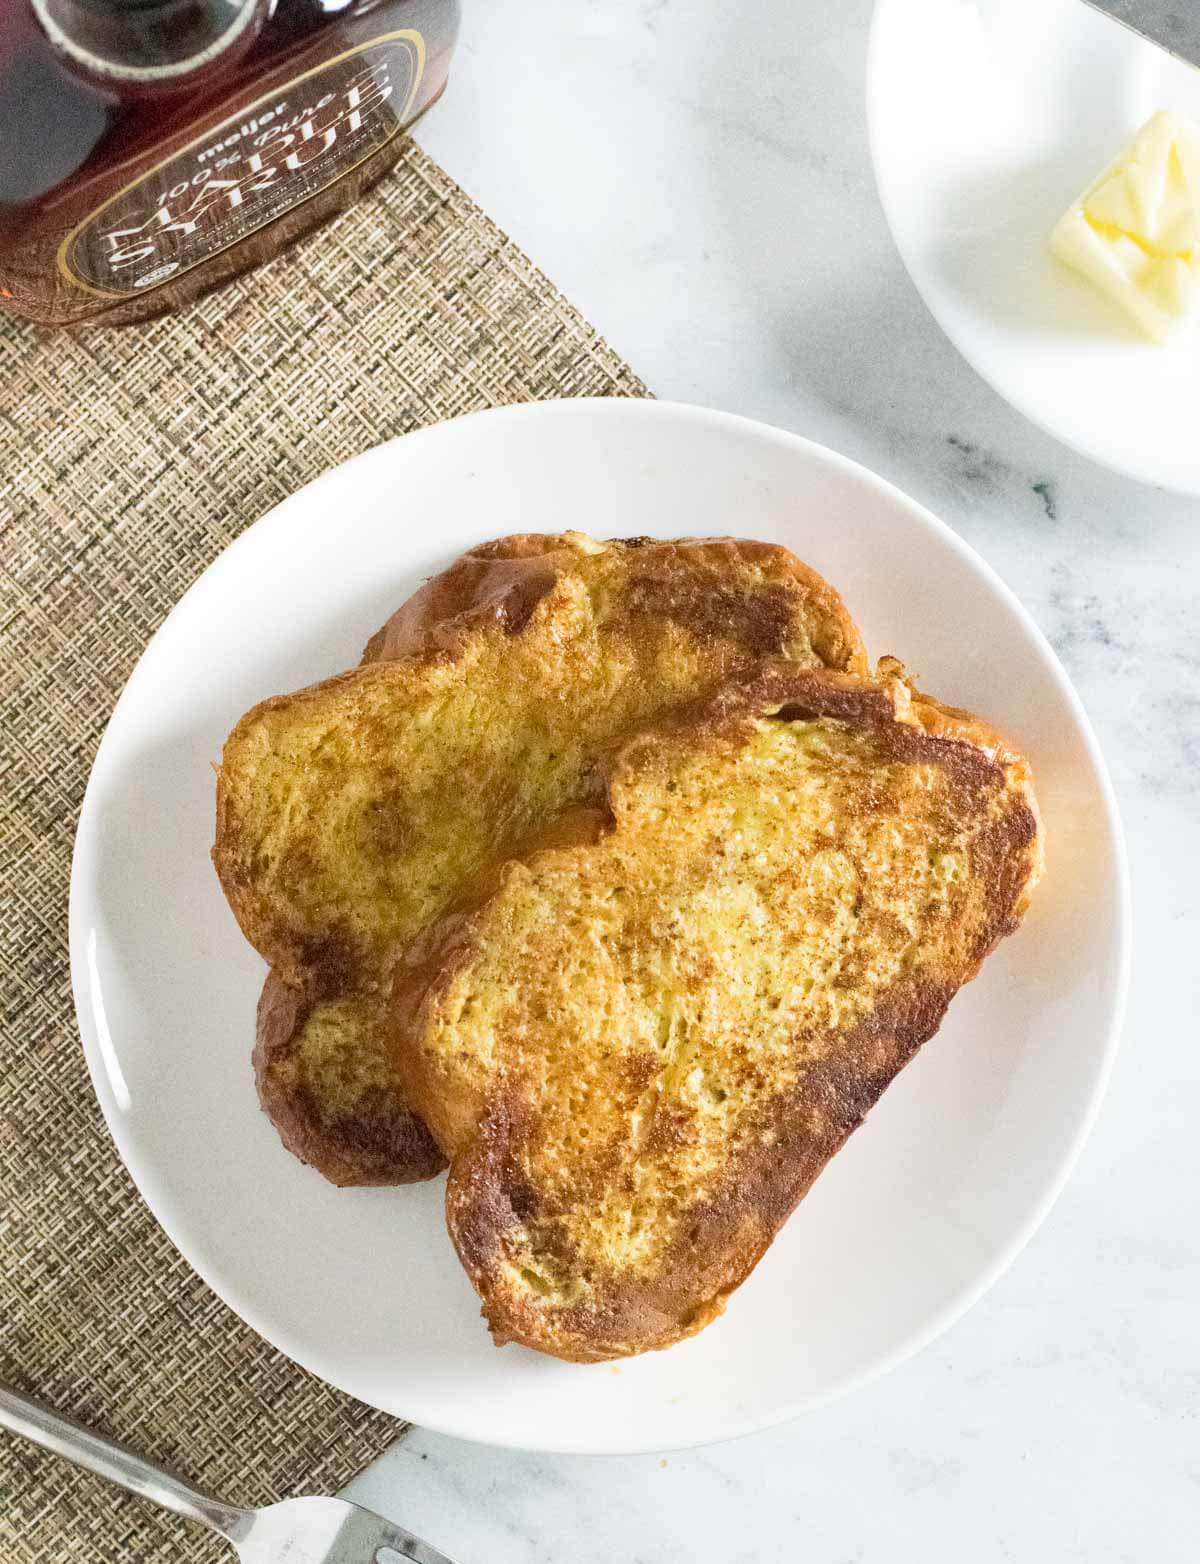 Two slices of French toast served on a plate.